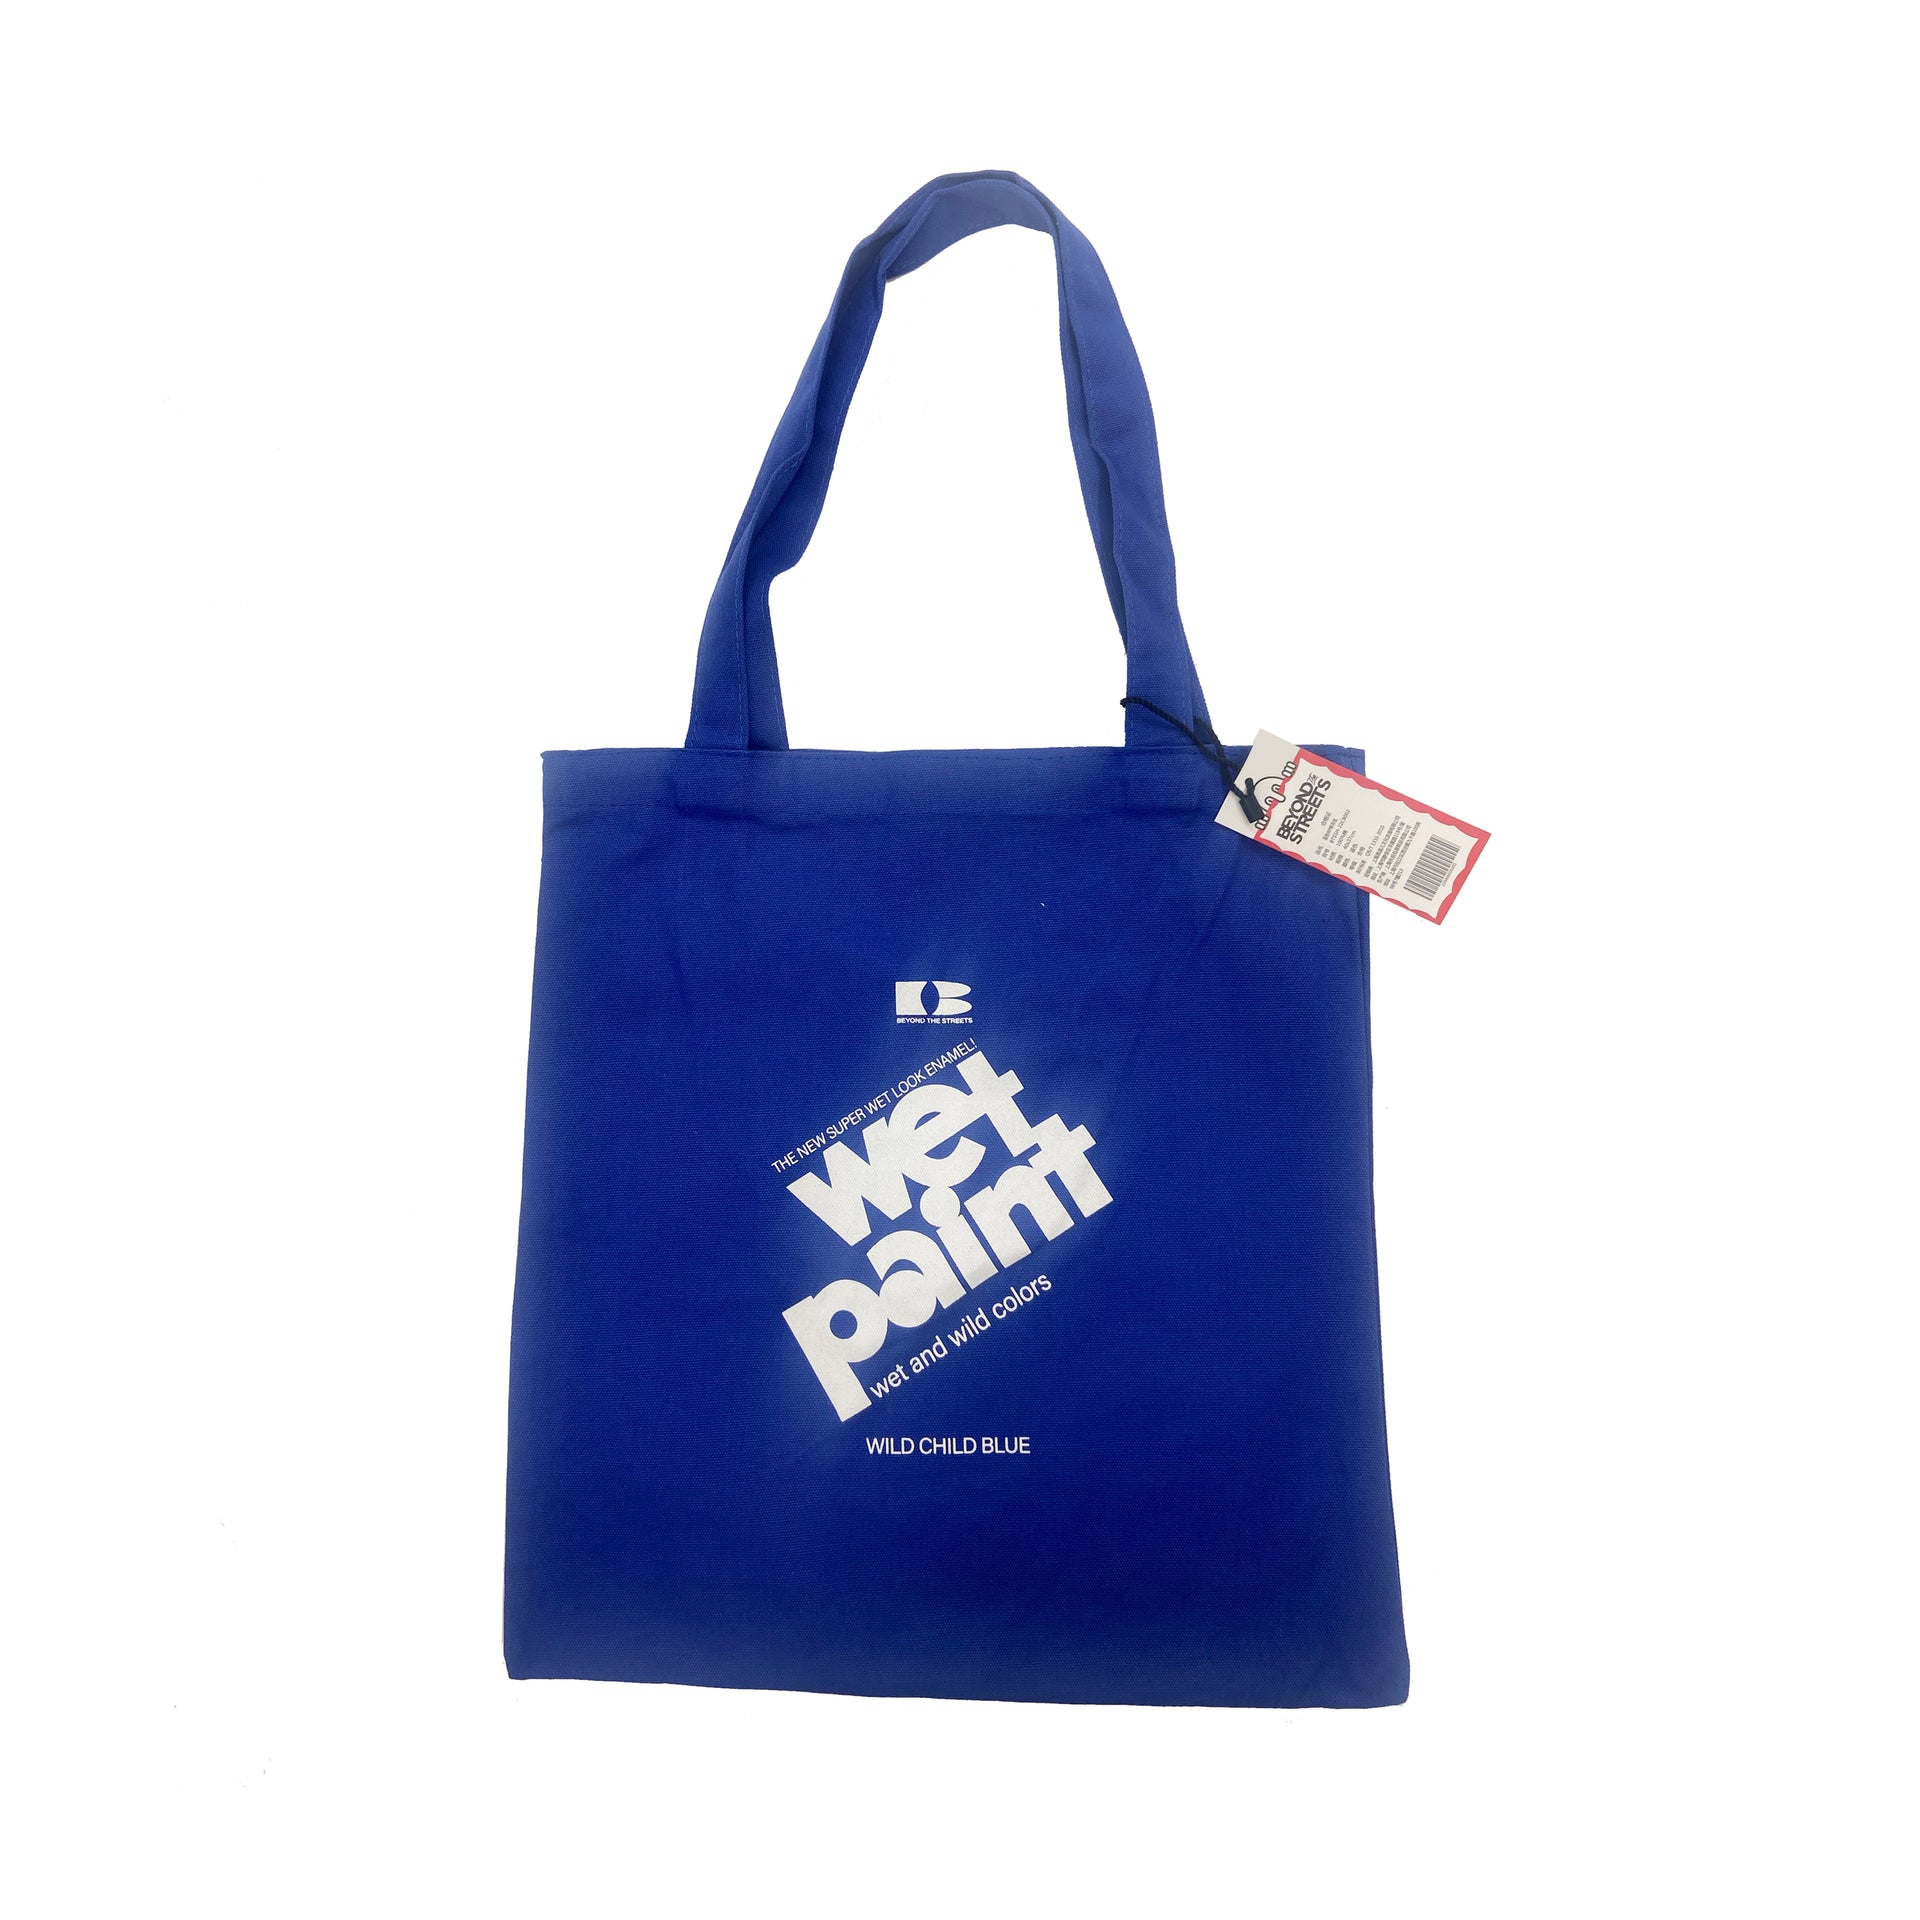 BEYOND THE STREETS "Wet Paint" Tote Bag